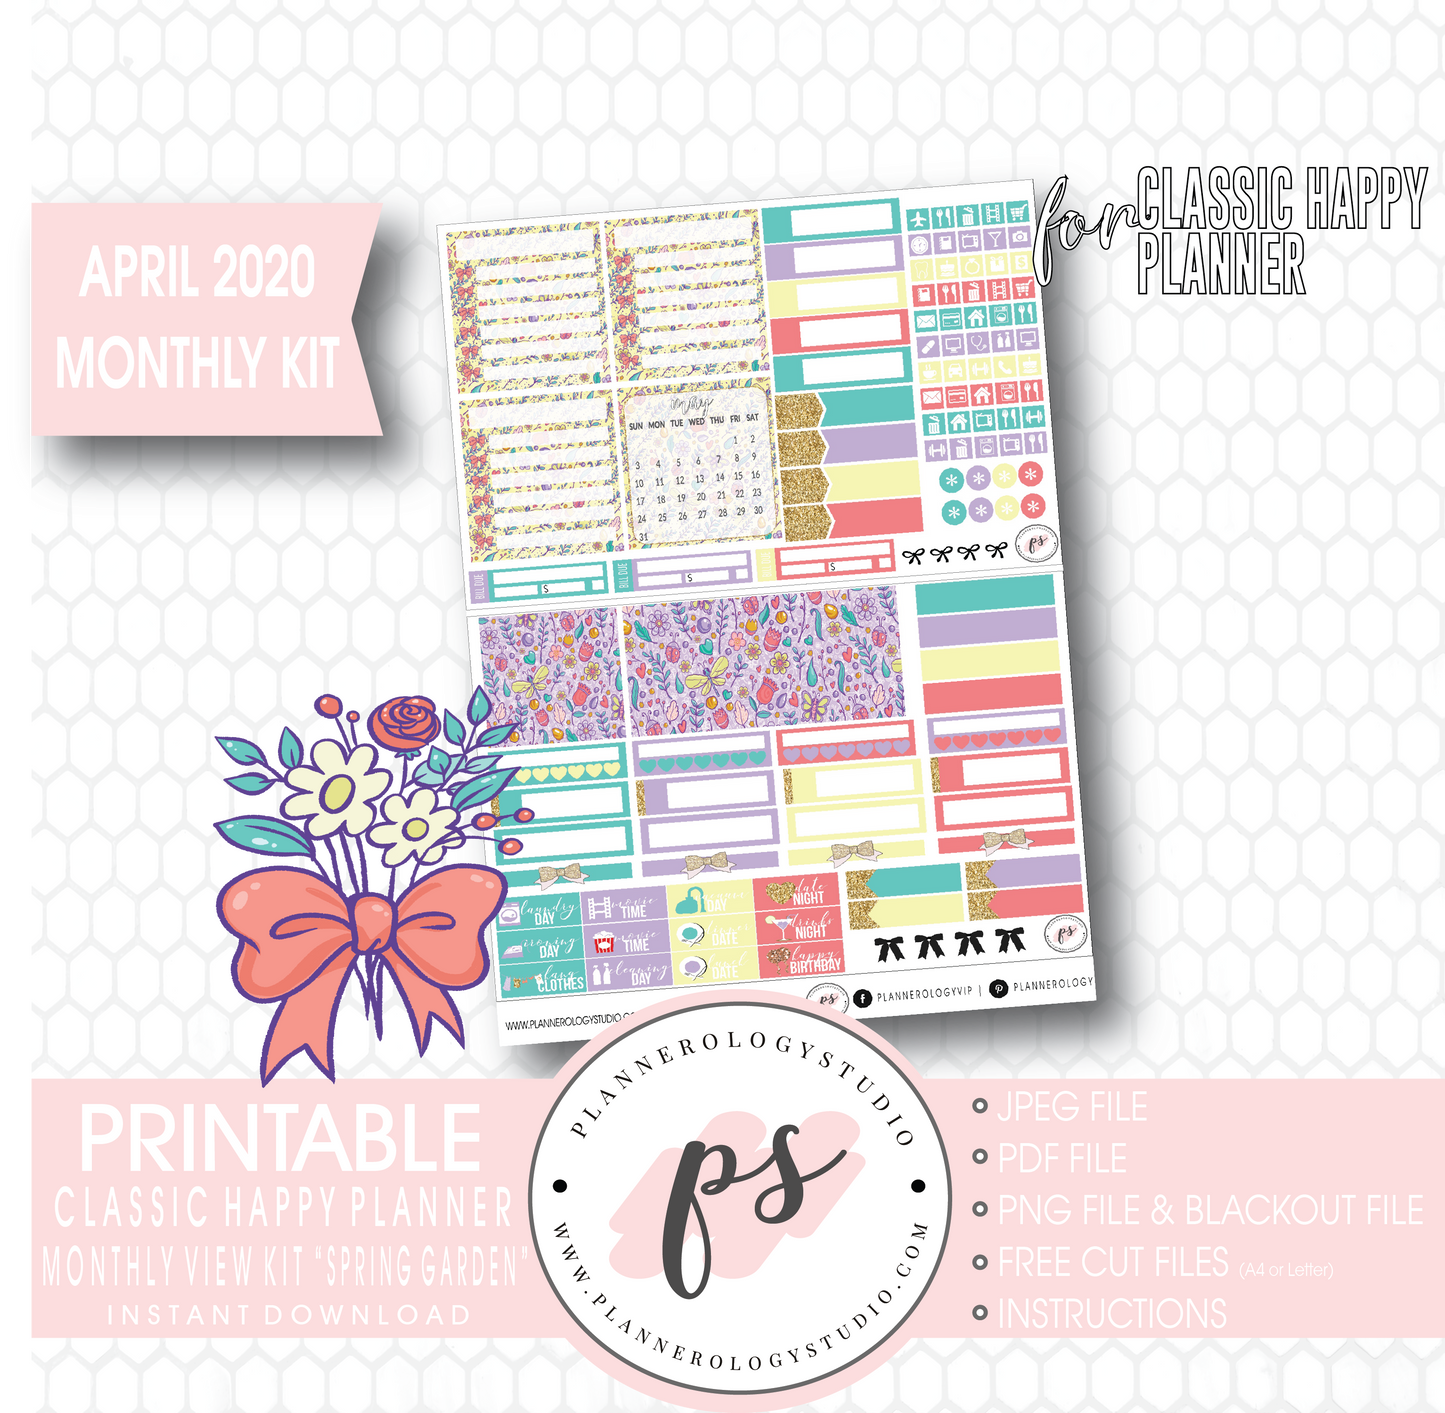 Spring Garden April 2020 Easter Monthly View Kit Digital Printable Planner Stickers (for use with Classic Happy Planner) - Plannerologystudio